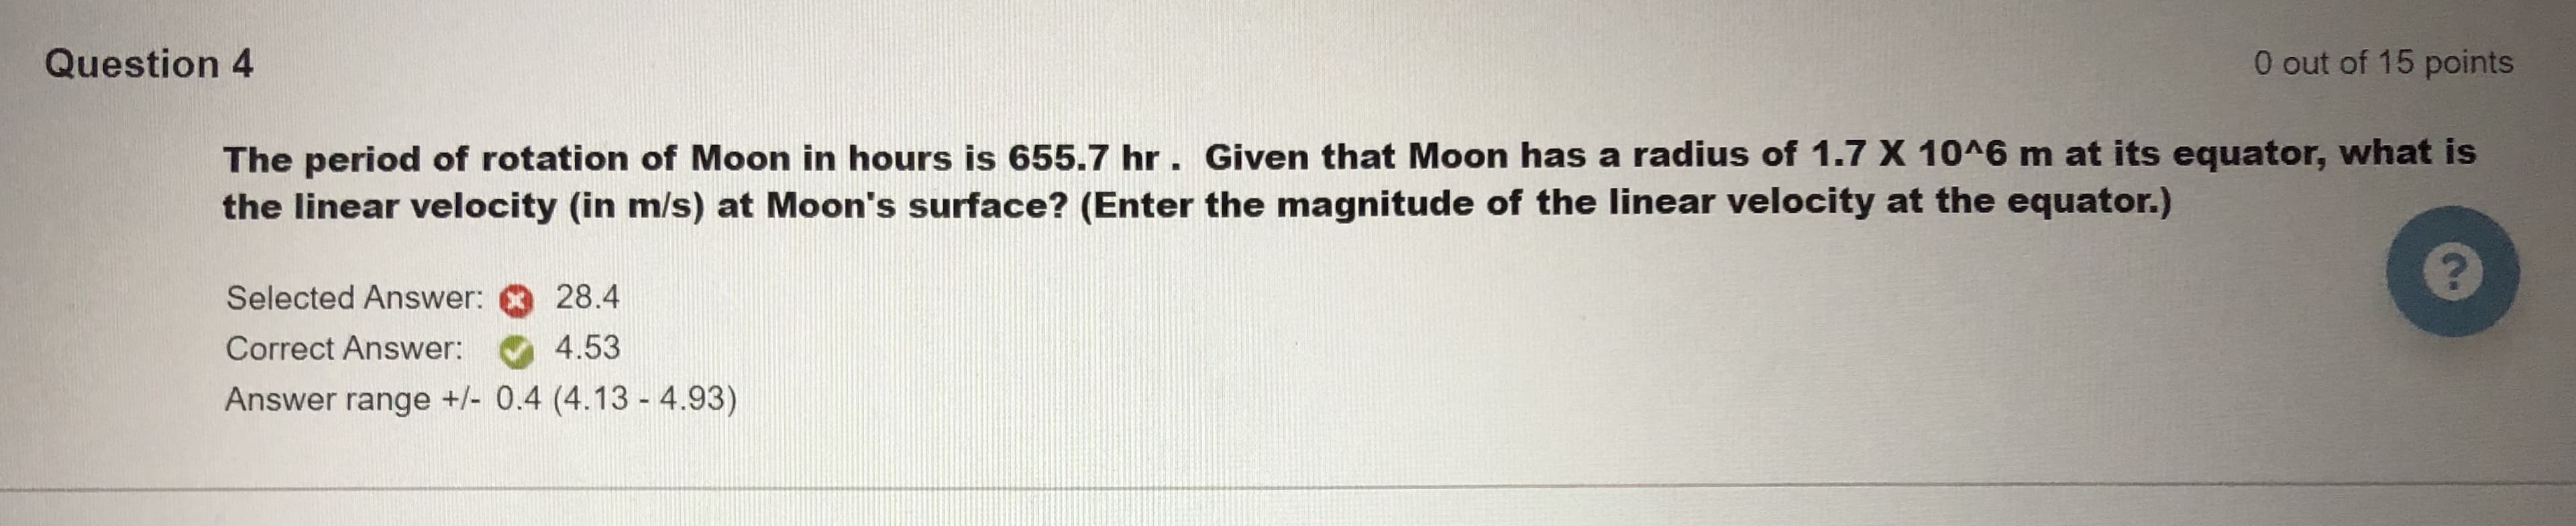 The period of rotation of Moon in hours is 655.7 hr. Given that Moon has a radius of 1.7 X 10^6 m at its equator, what is
the linear velocity (in m/s) at Moon's surface? (Enter the magnitude of the linear velocity at the equator.)
